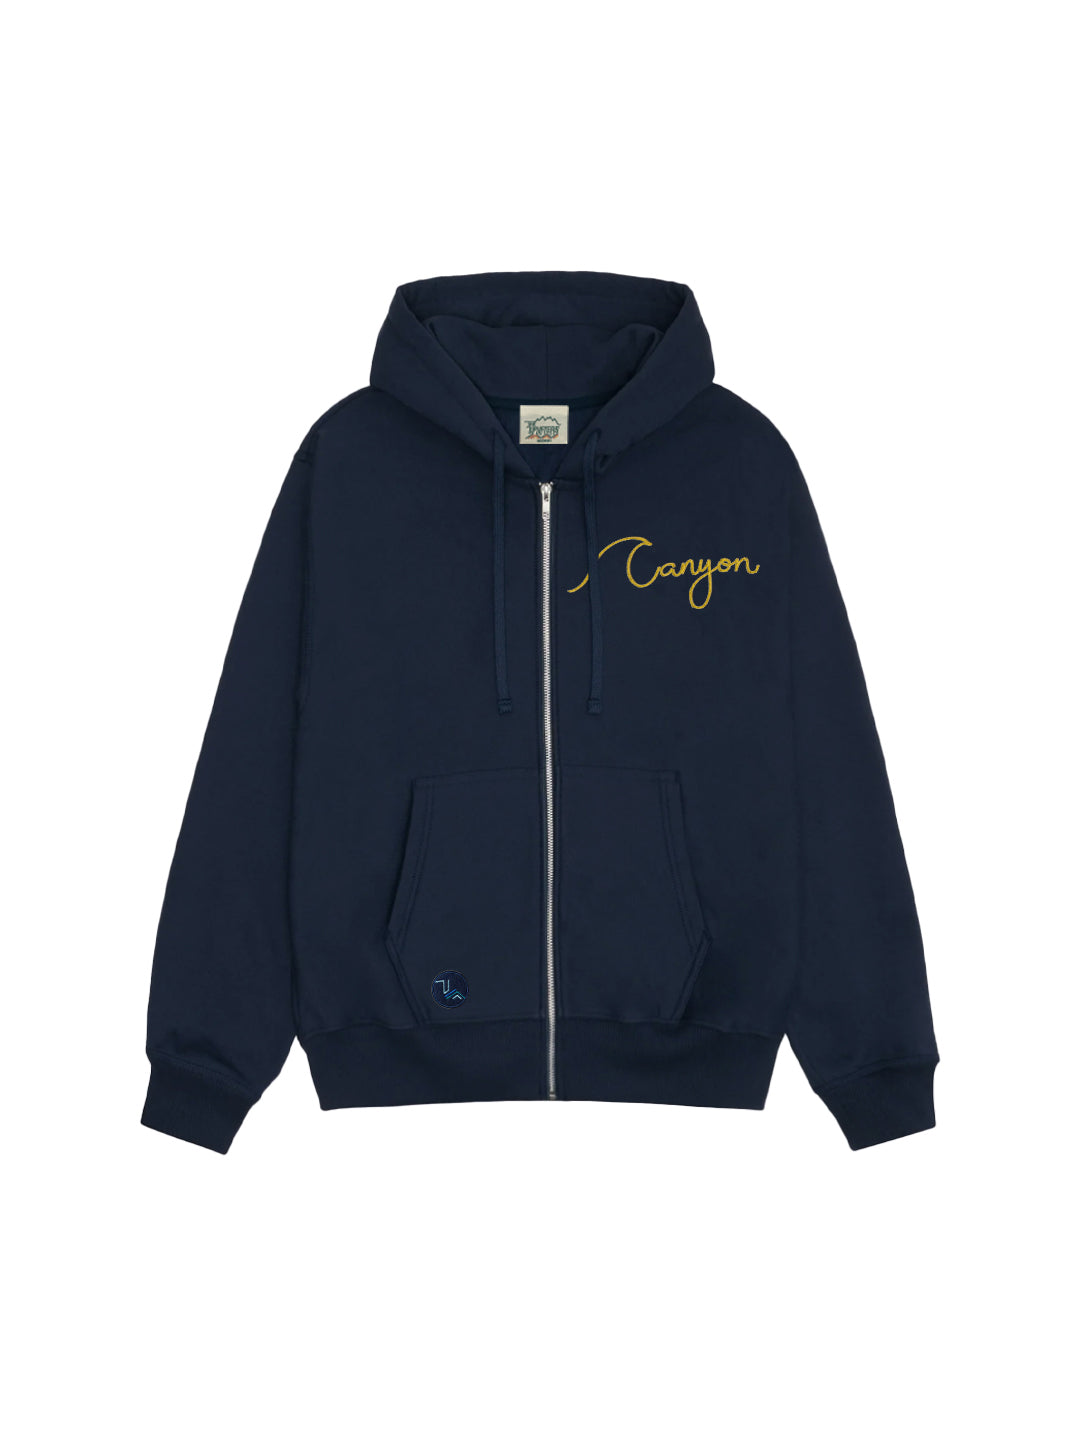 Canyon Wave Adult Hoodie in Navy